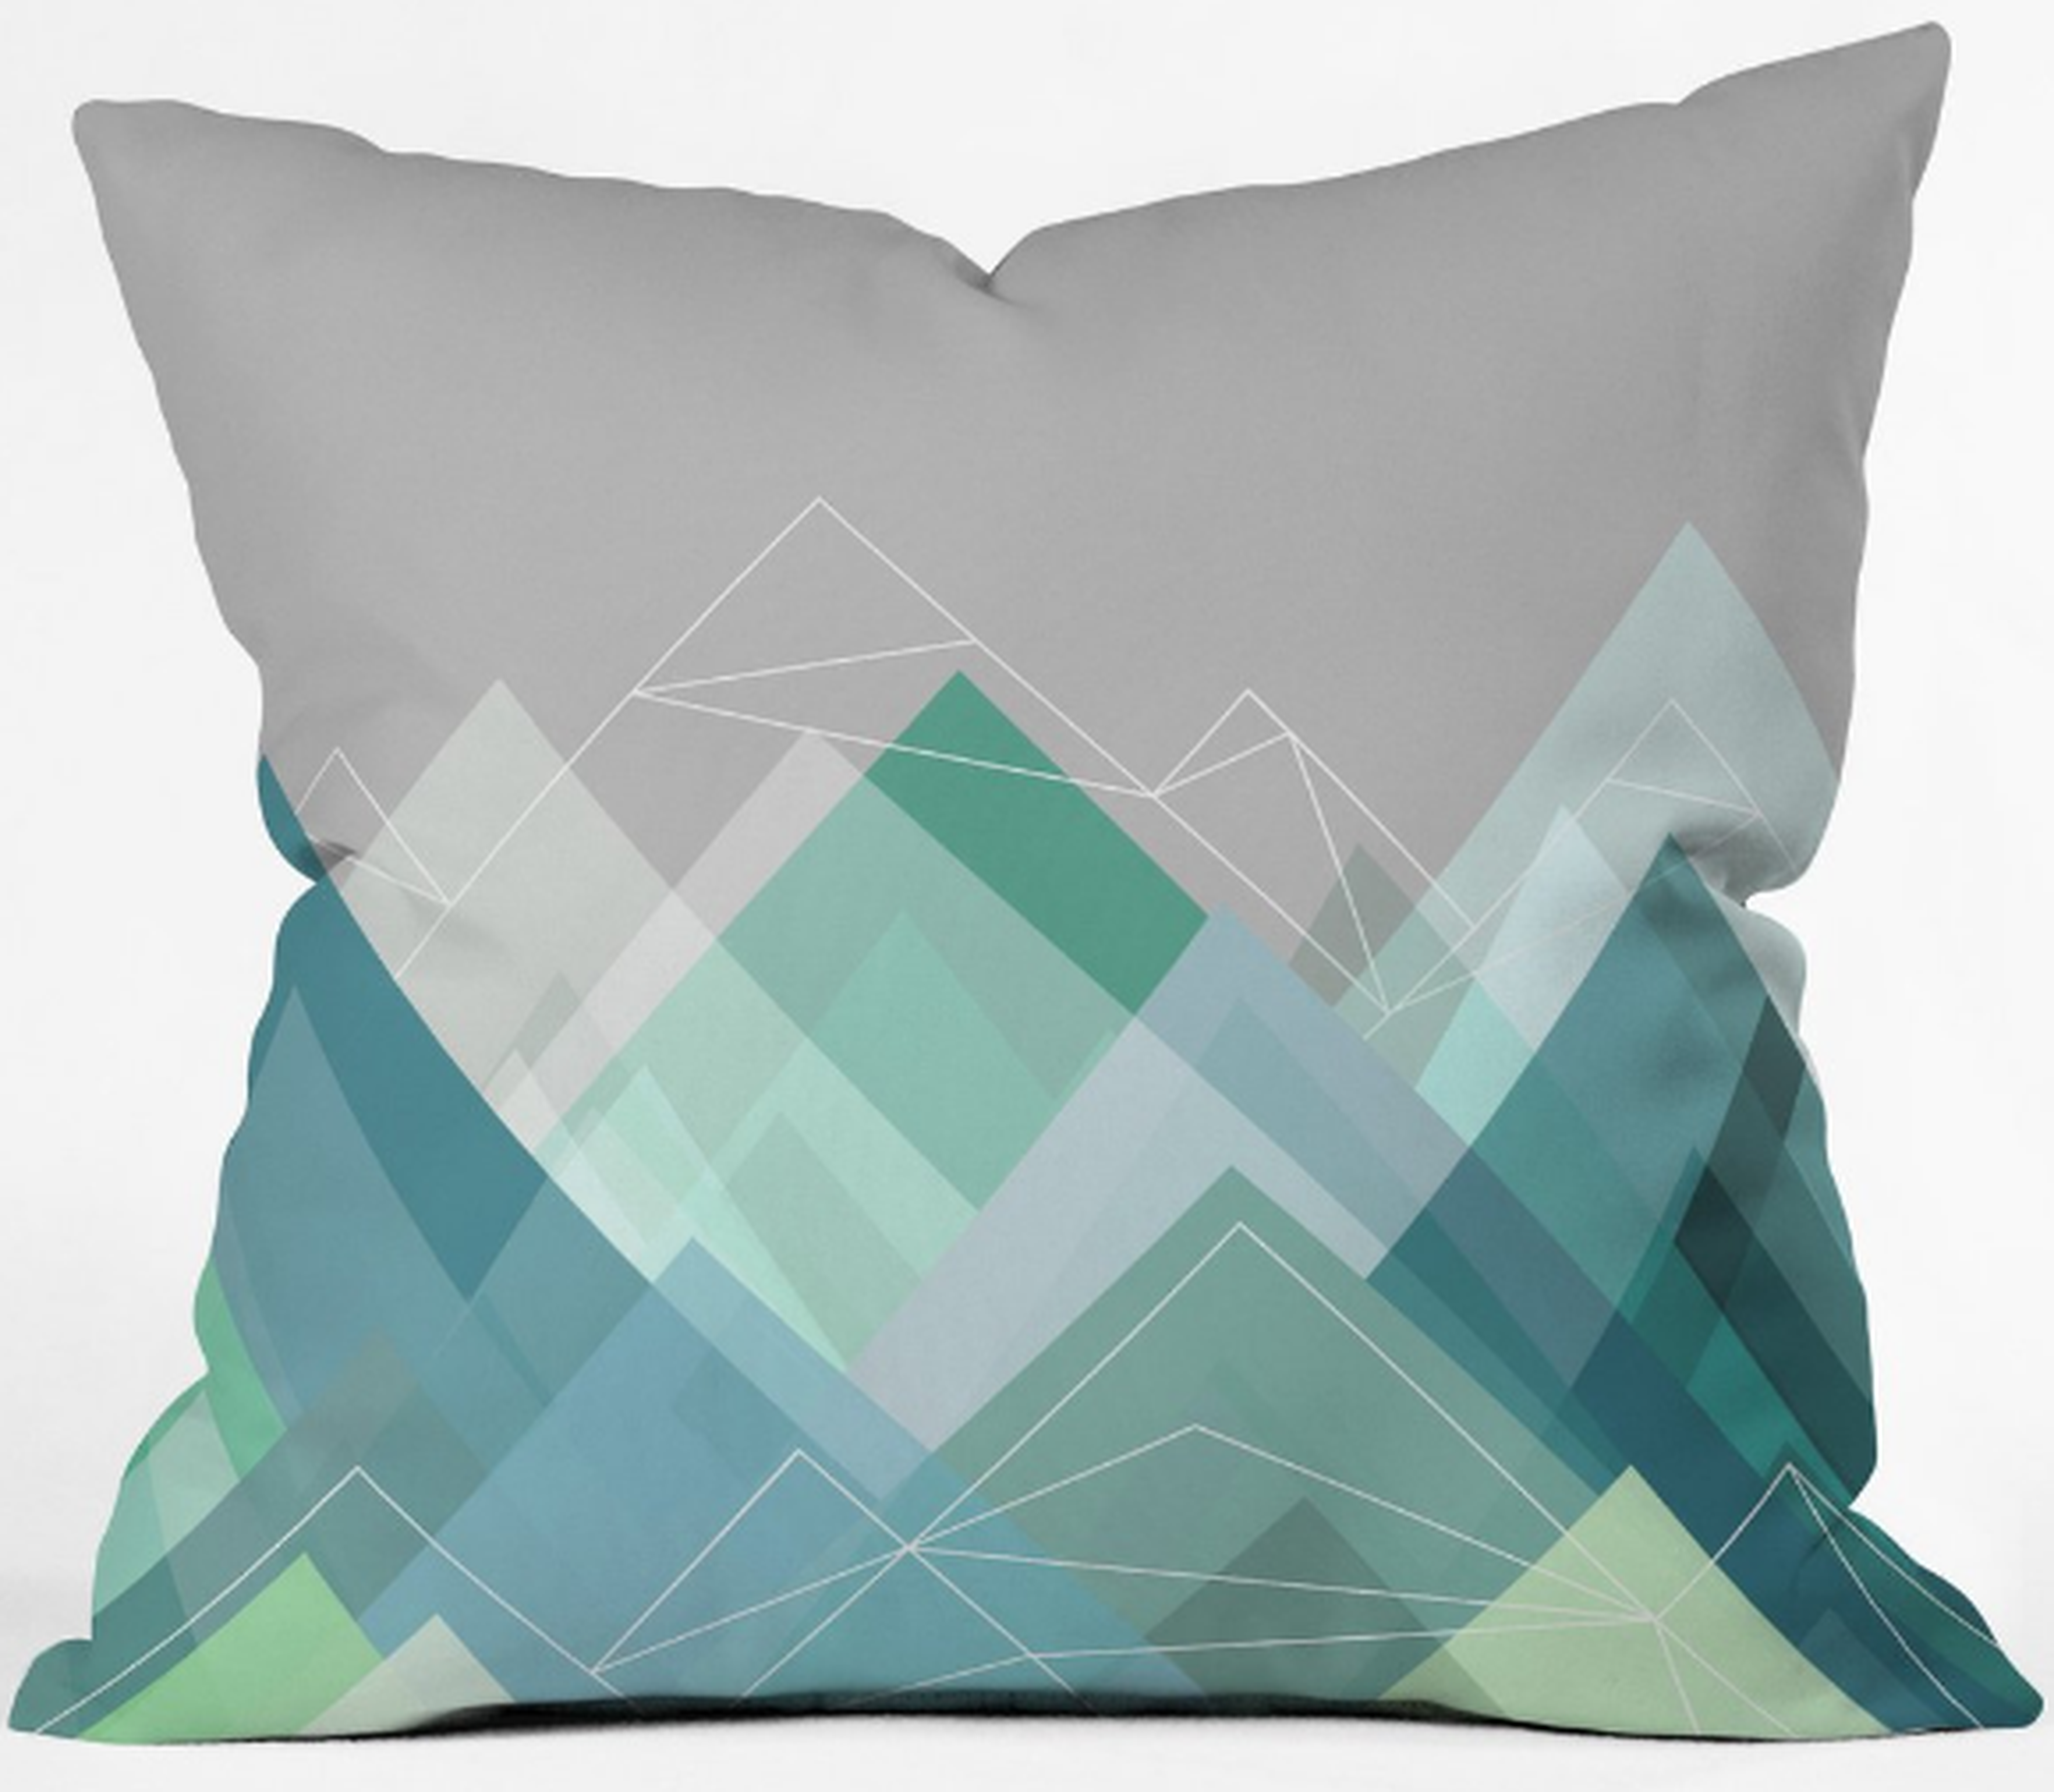 GRAPHIC 107 Y Pillow - 16" x 16" - With Insert - Wander Print Co.